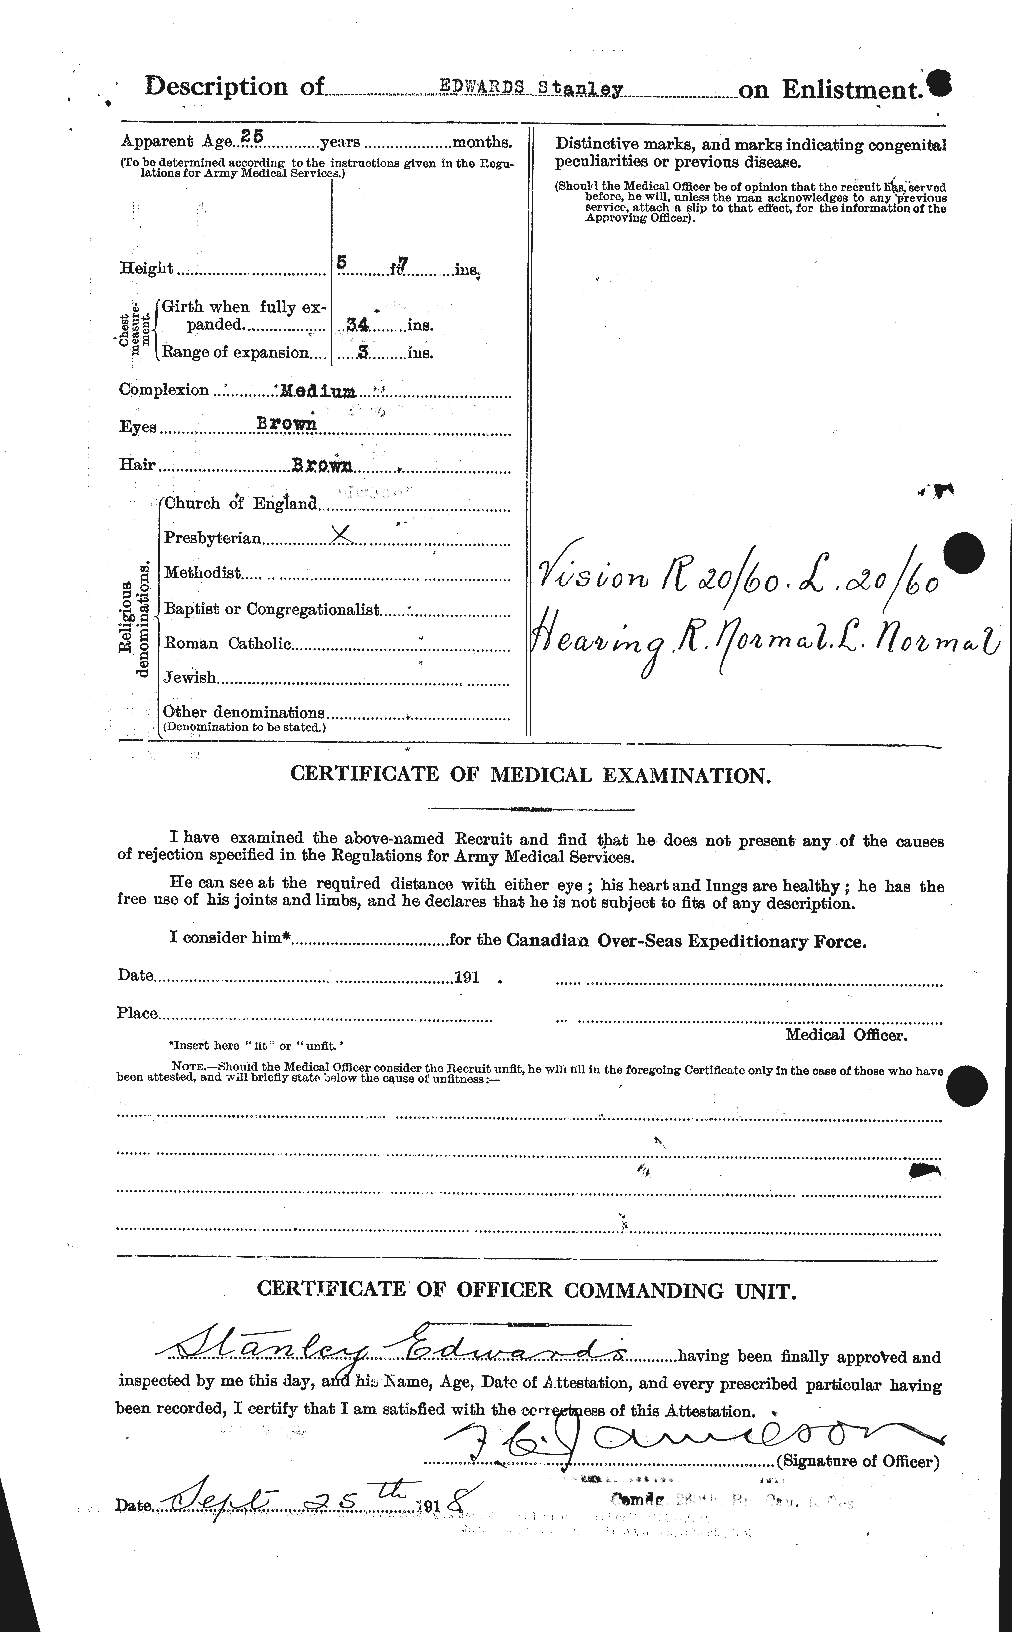 Personnel Records of the First World War - CEF 310315b